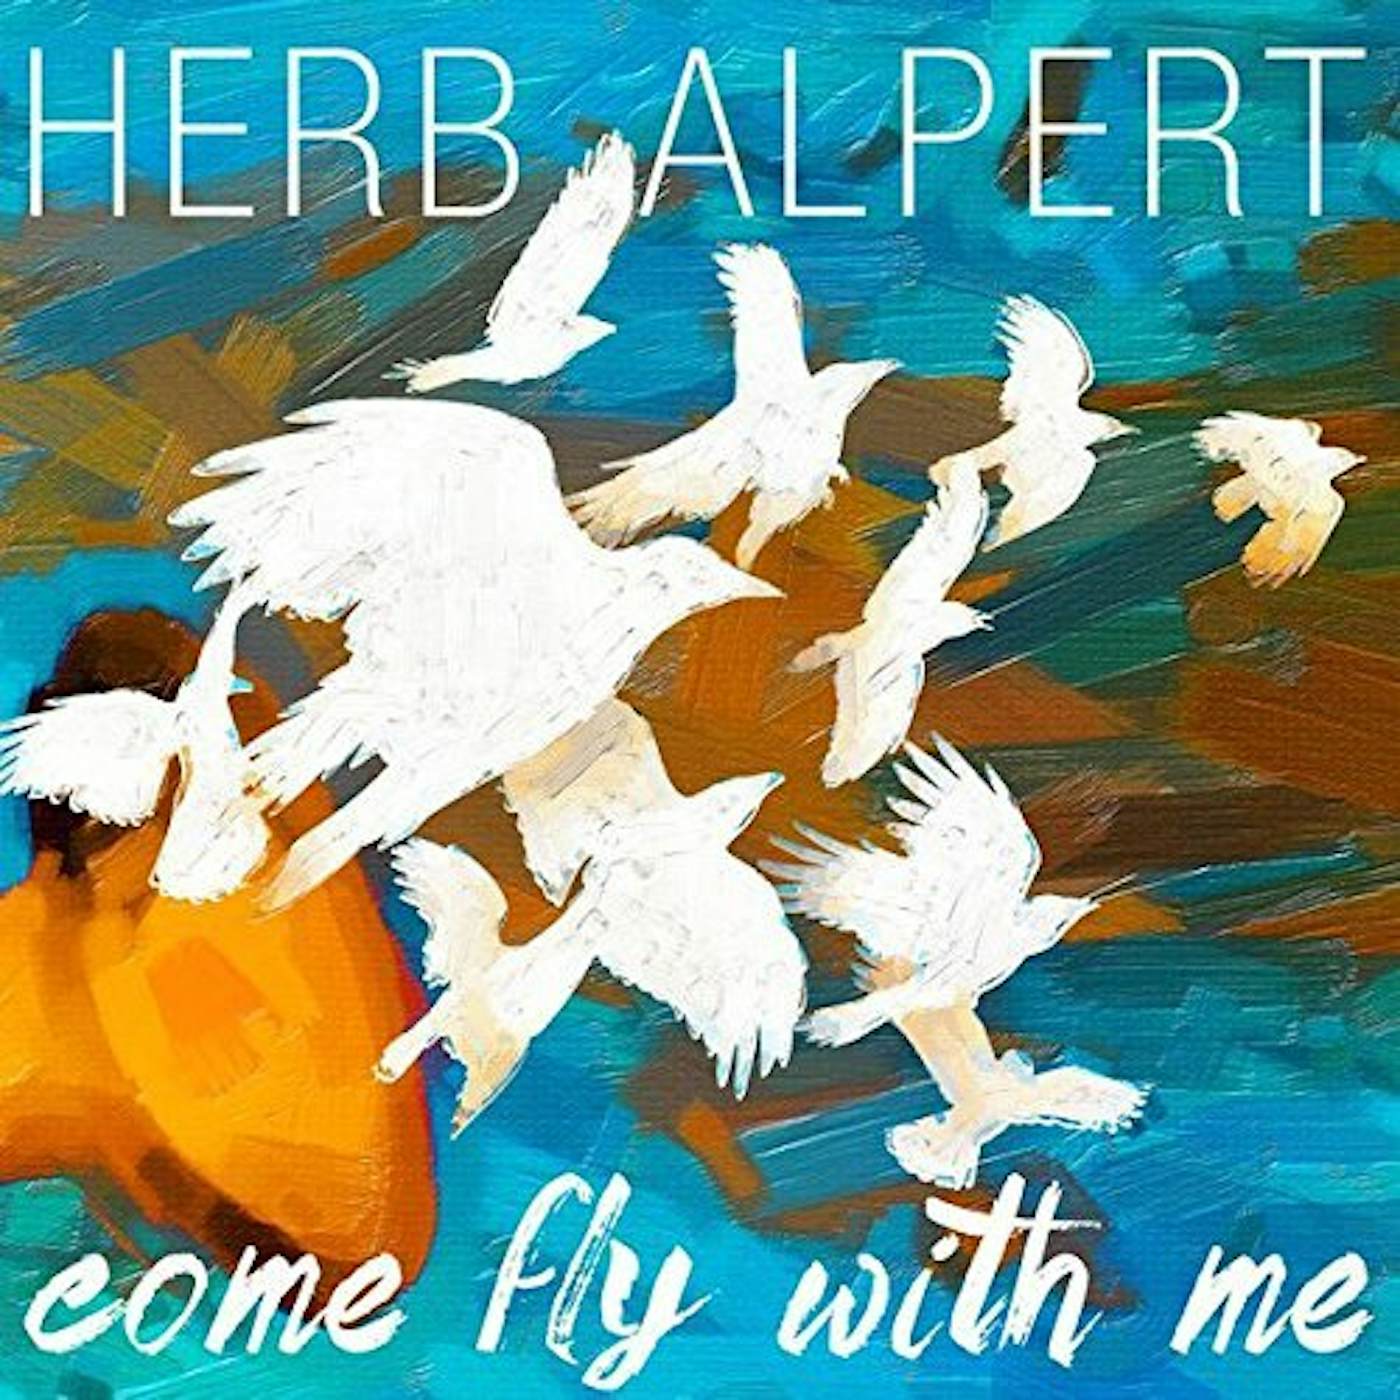 Herb Alpert COME FLY WITH ME CD